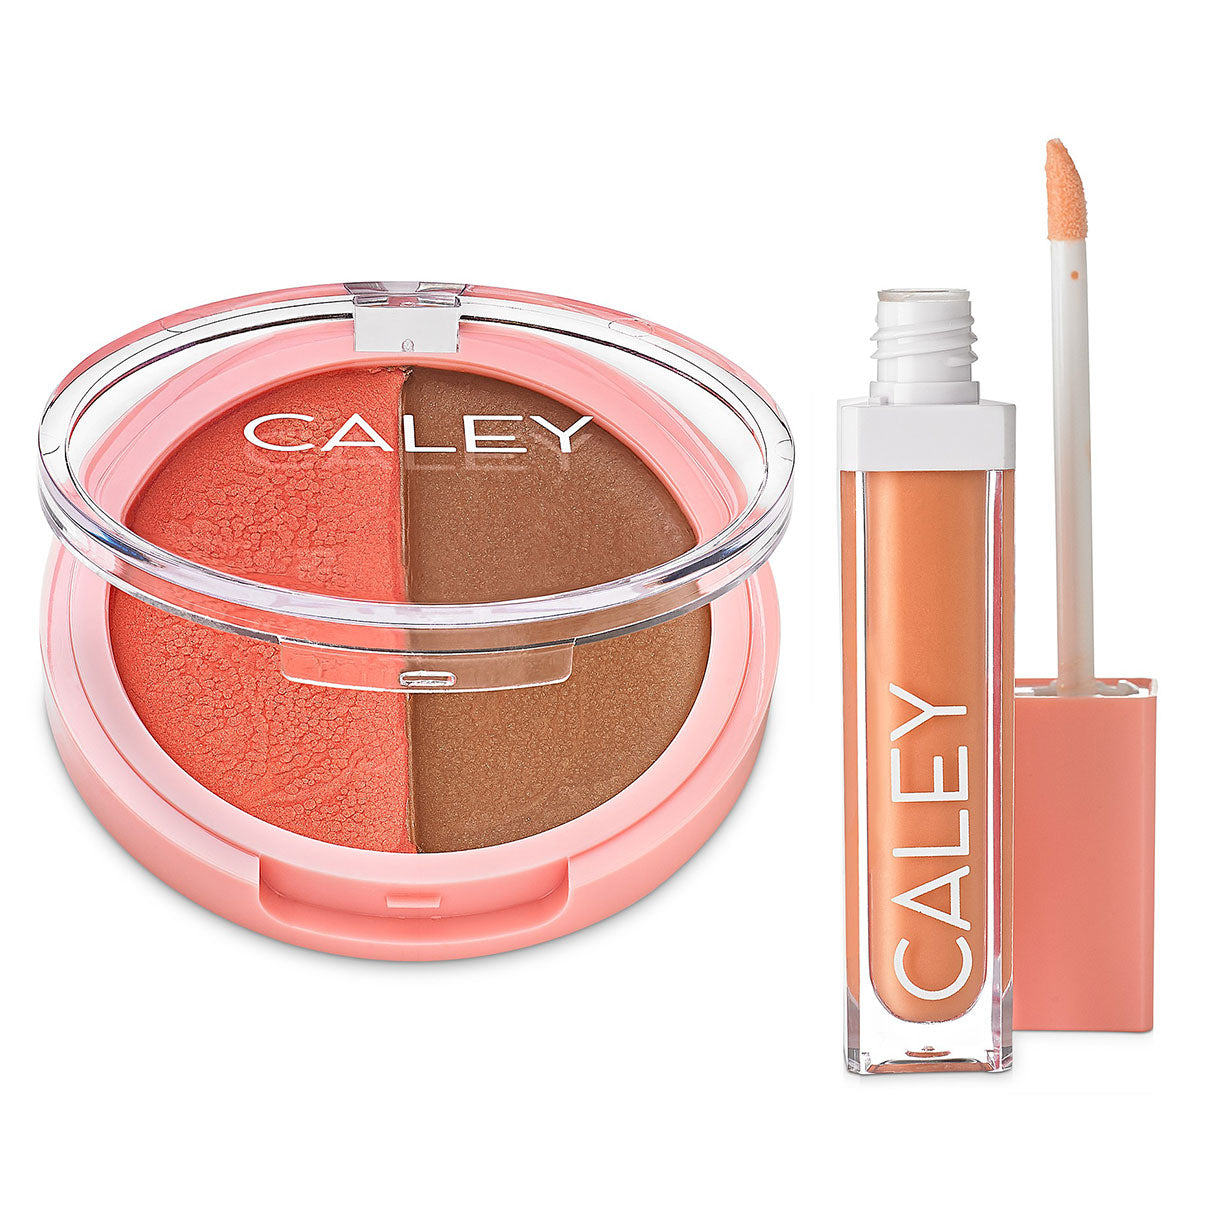 Multi tasking makeup with probiotics from Caley clean cosmetics